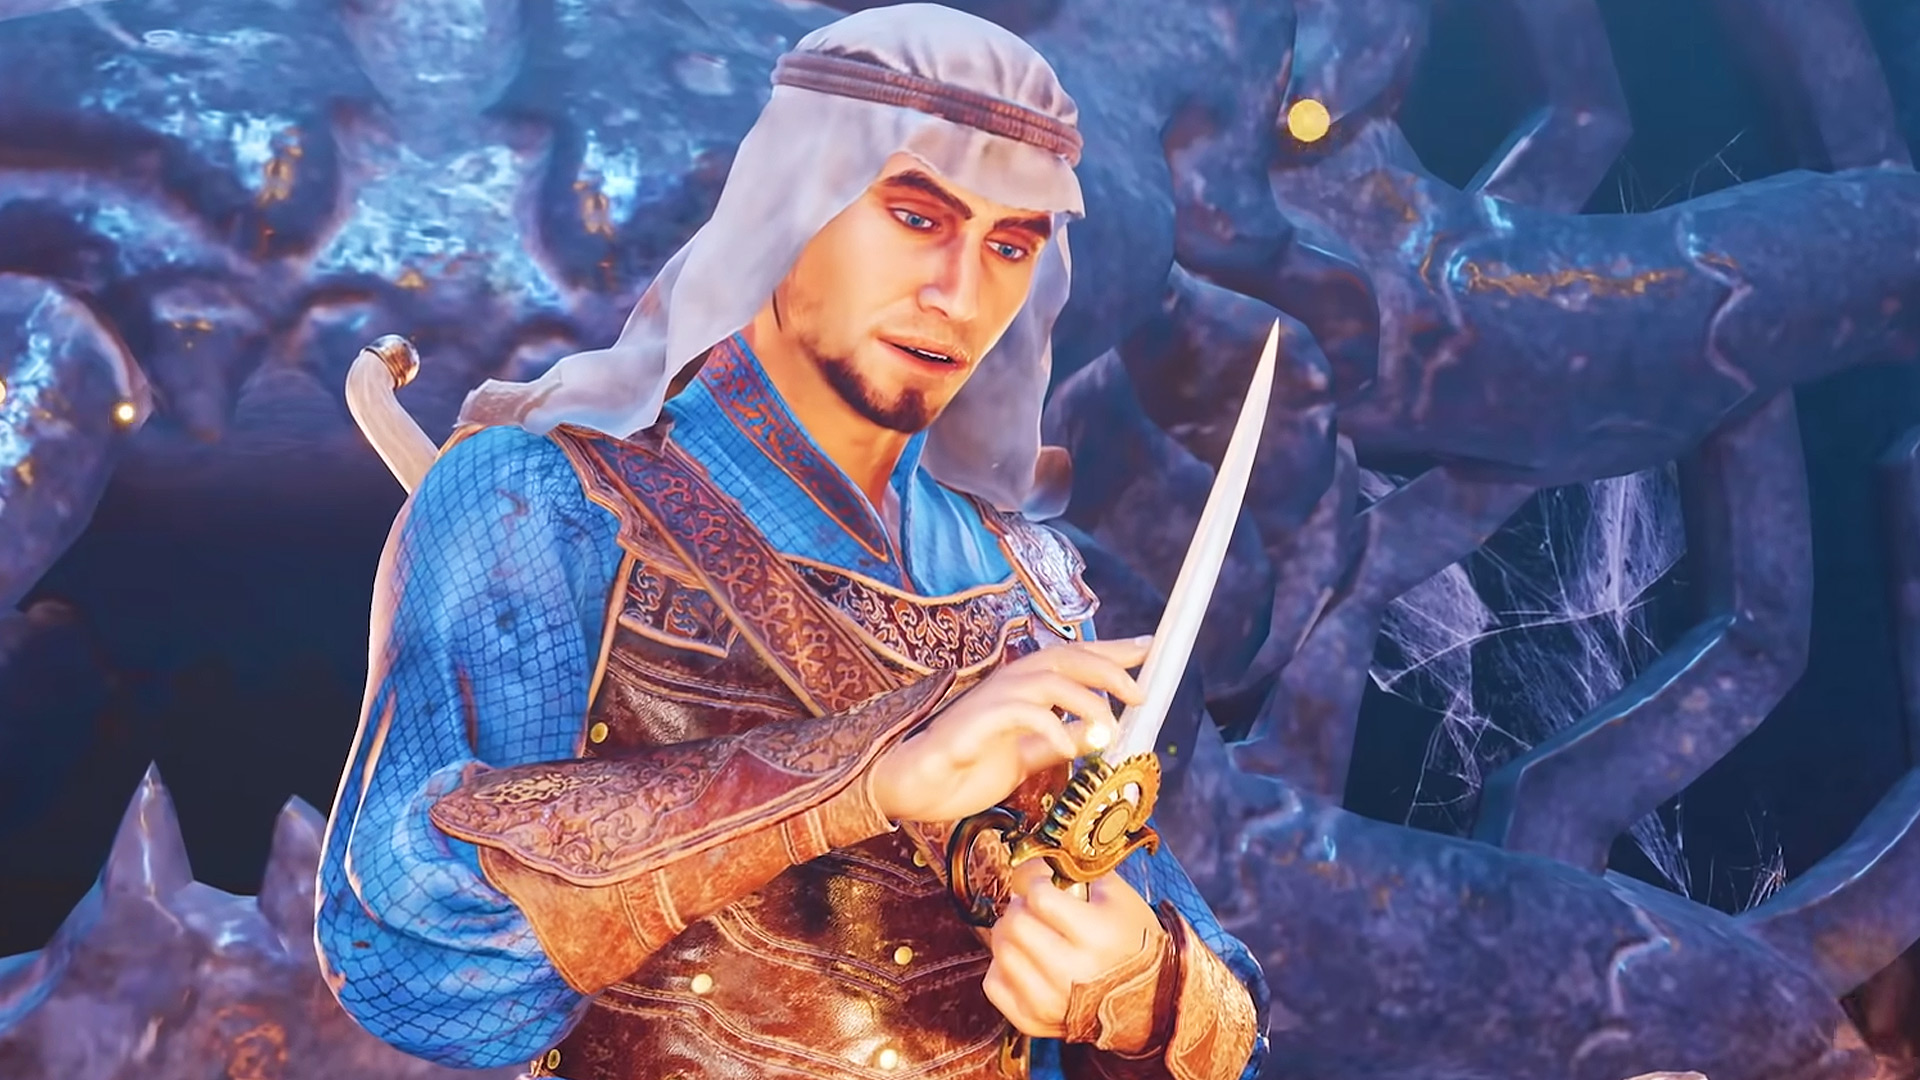 Prince of Persia The Sands of Time Remake release date rumors, more